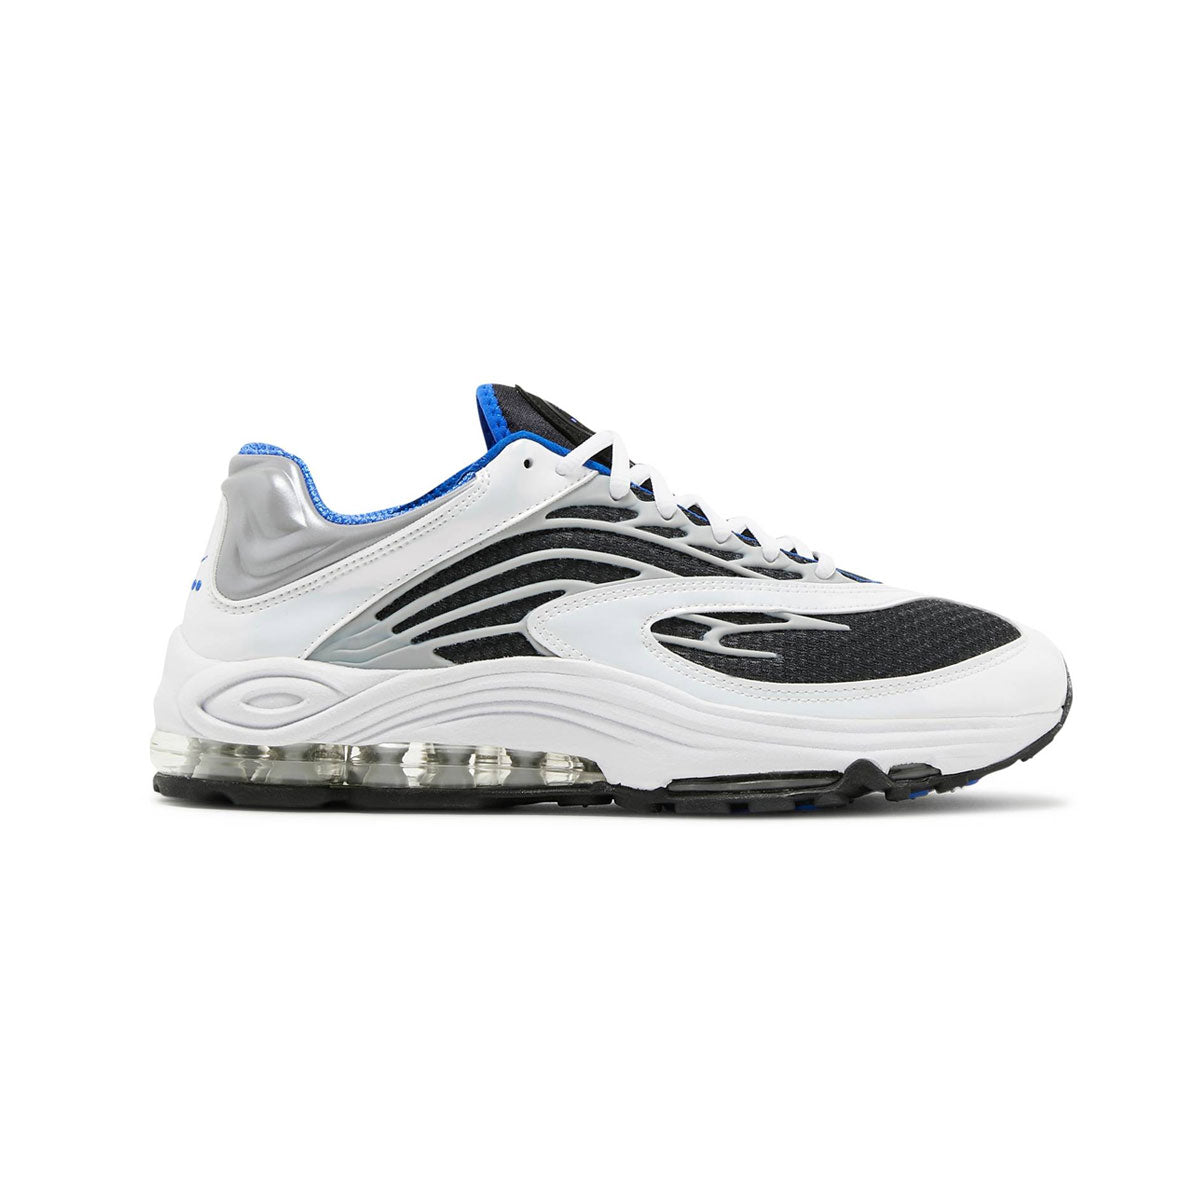 Nike Men's Air Tuned Max Racer Blue